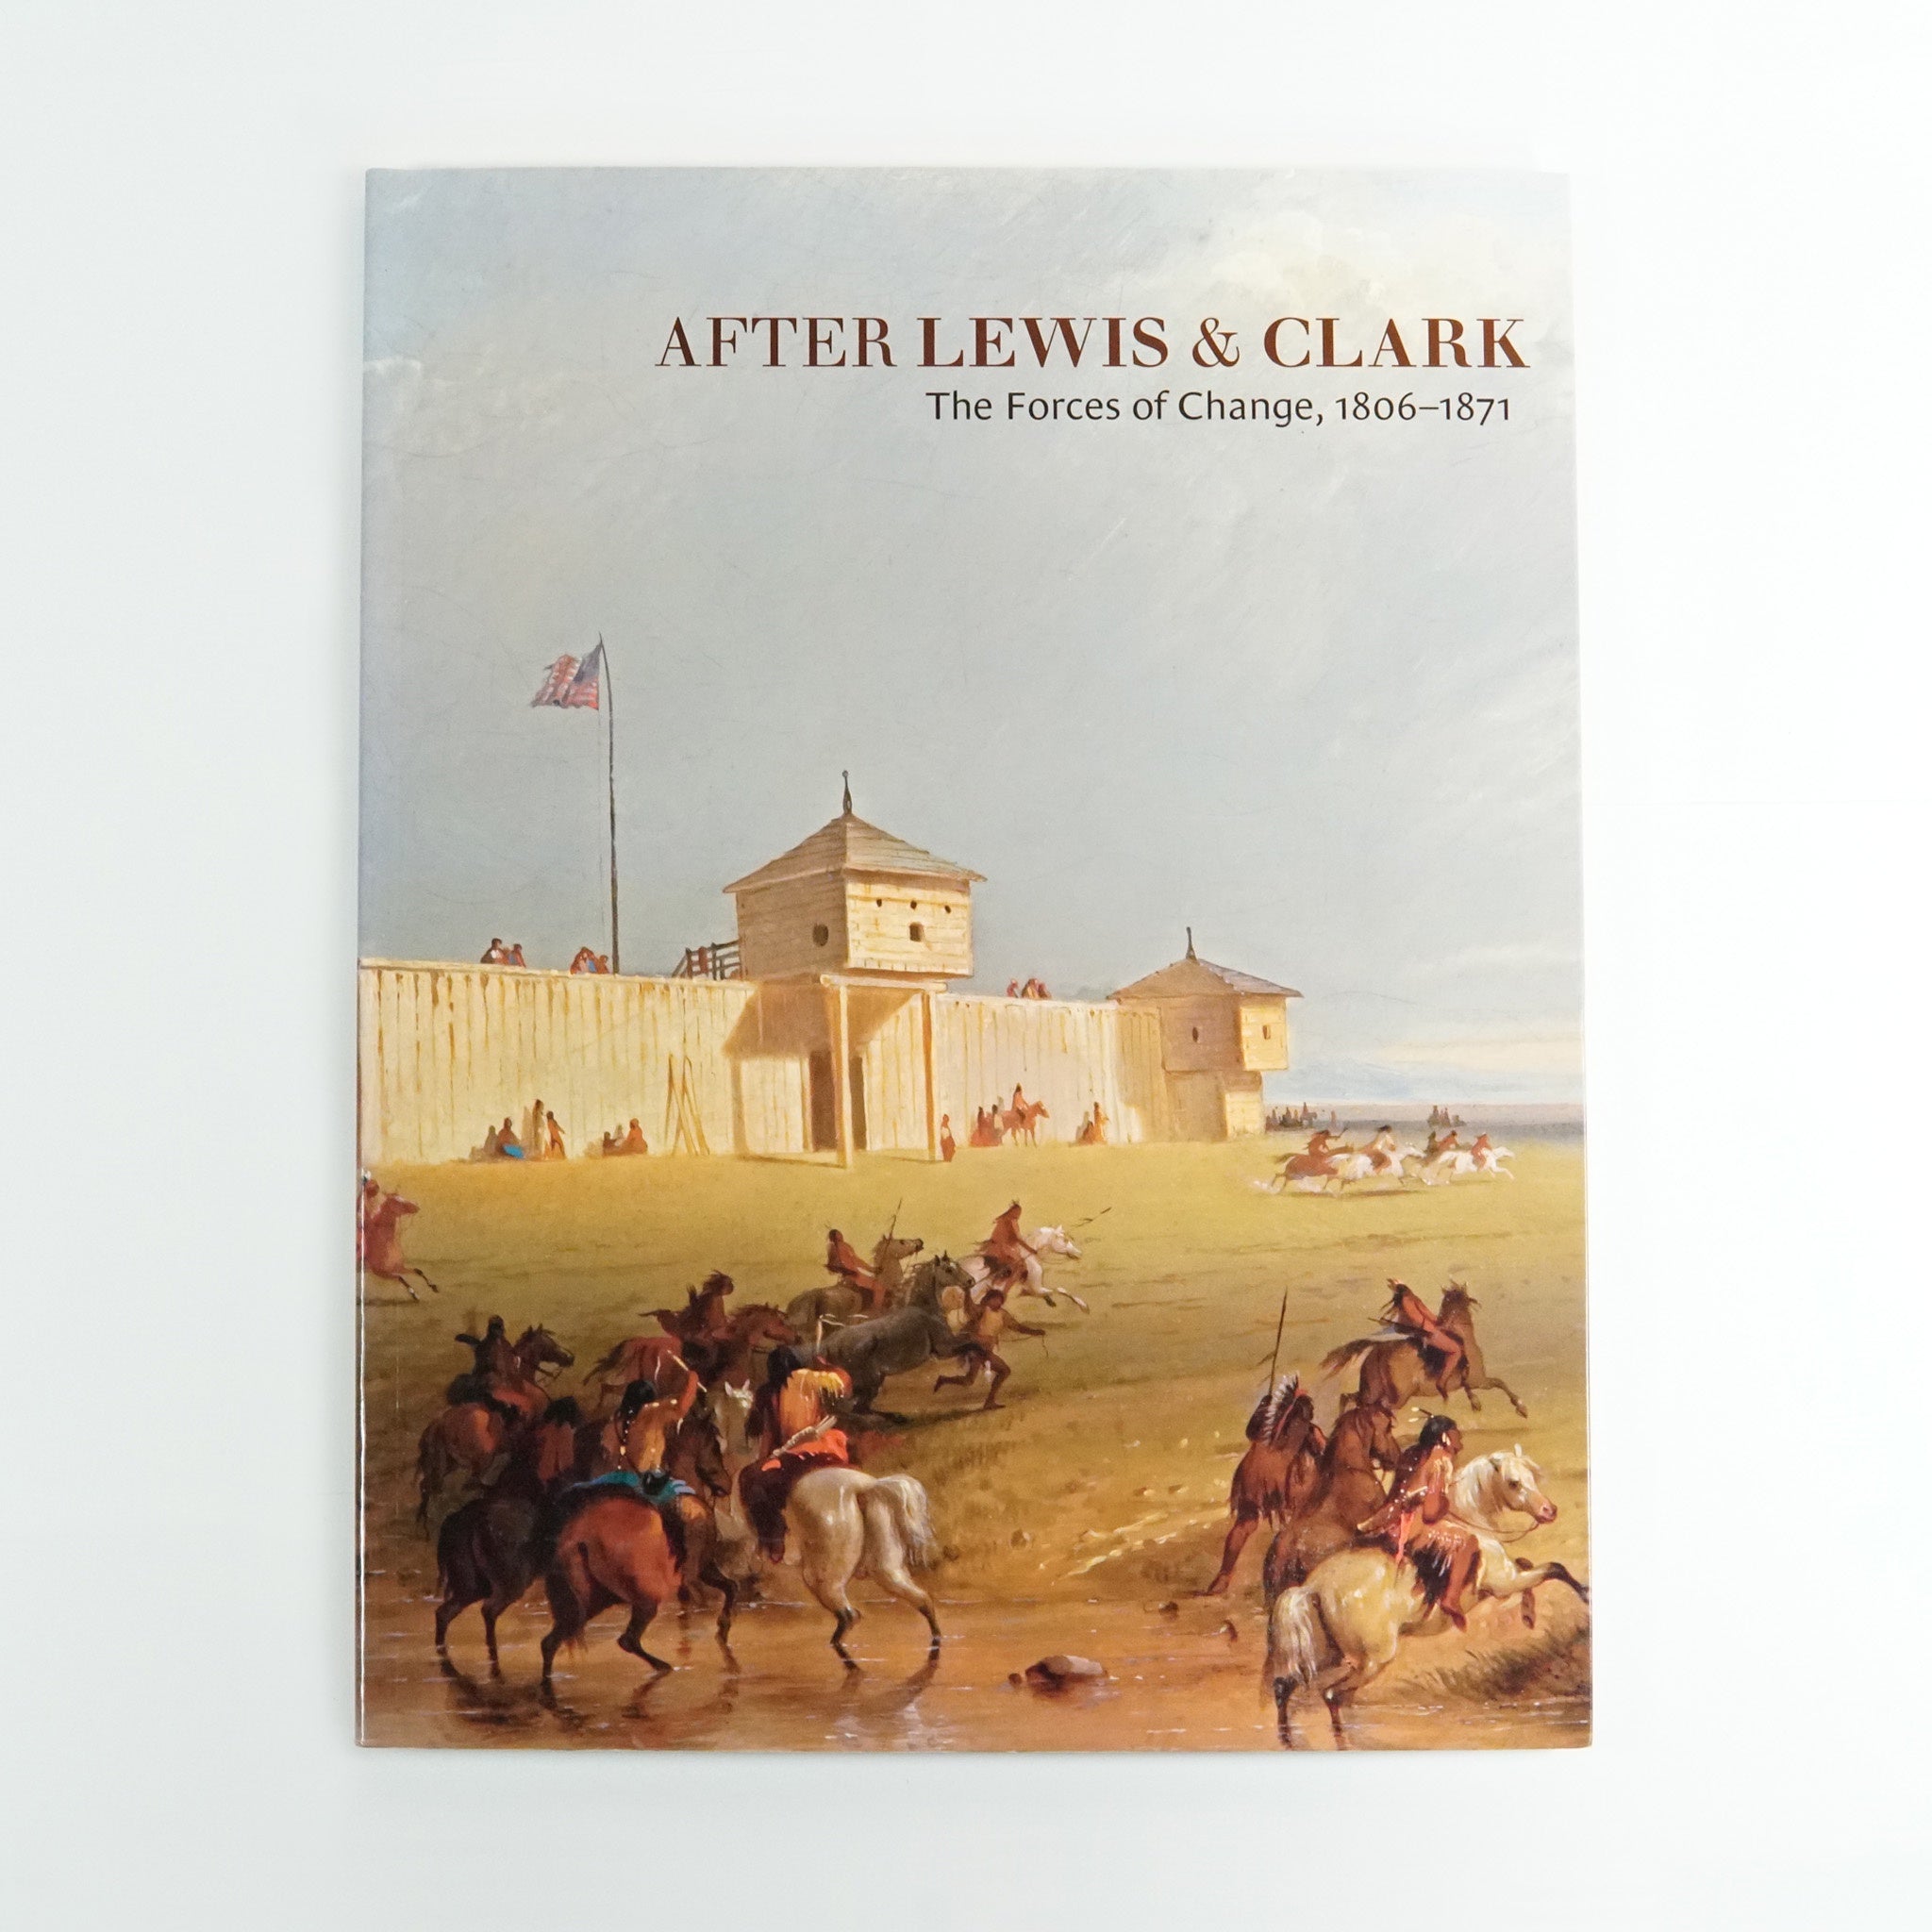 BK 2 AFTER LEWIS & CLARK THE FORCES OF CHANGE BY GARY ALLEN HOOD #21040668 OCT22